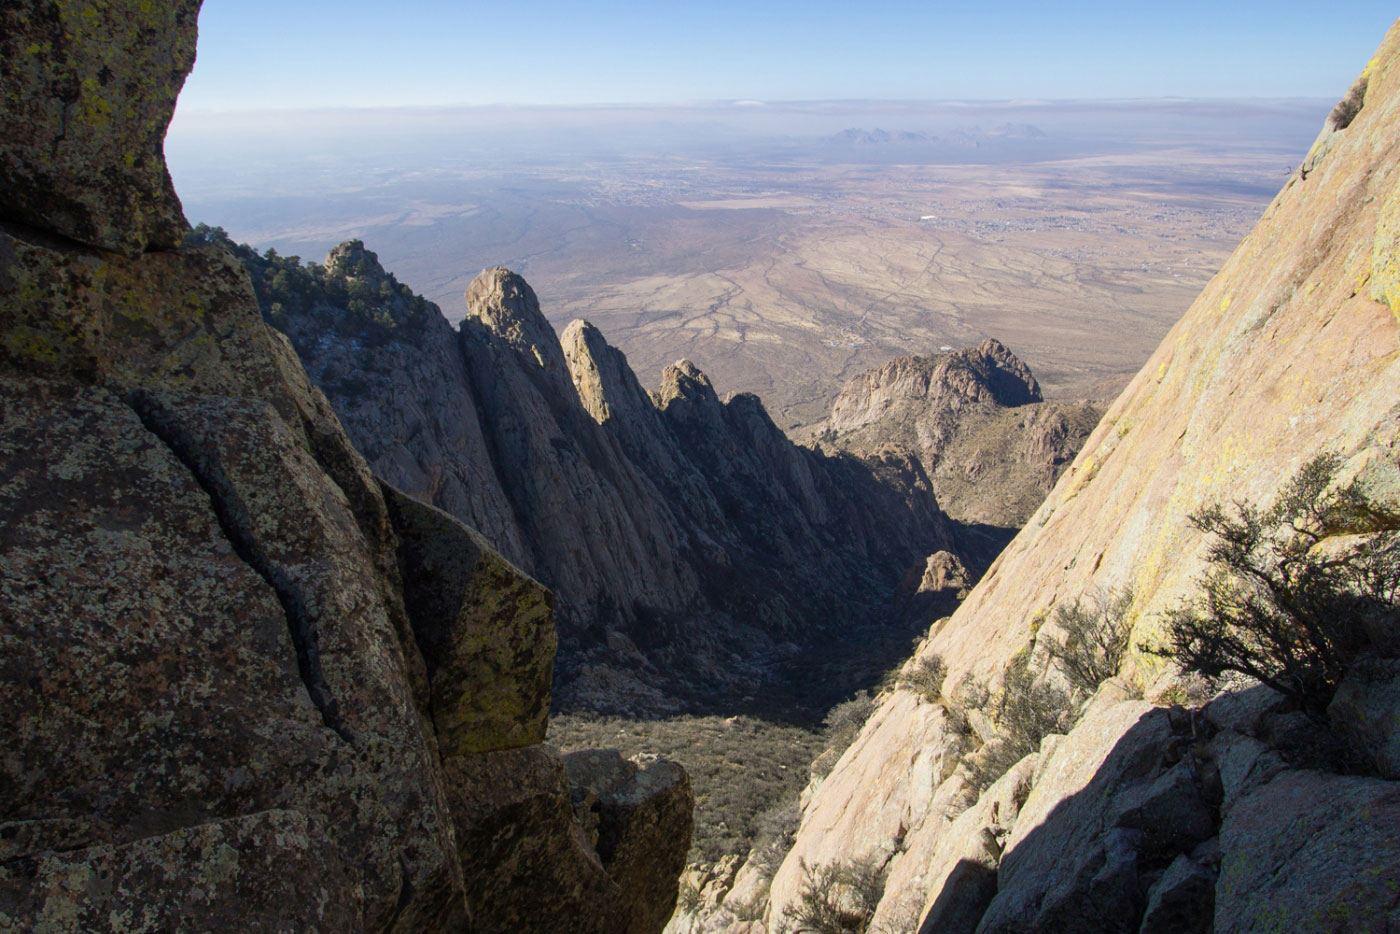 Hike South Rabbit Ear and Rabbit Ears Plateau in Organ Mountains-Desert Peaks National Monument, New Mexico - Stav is Lost